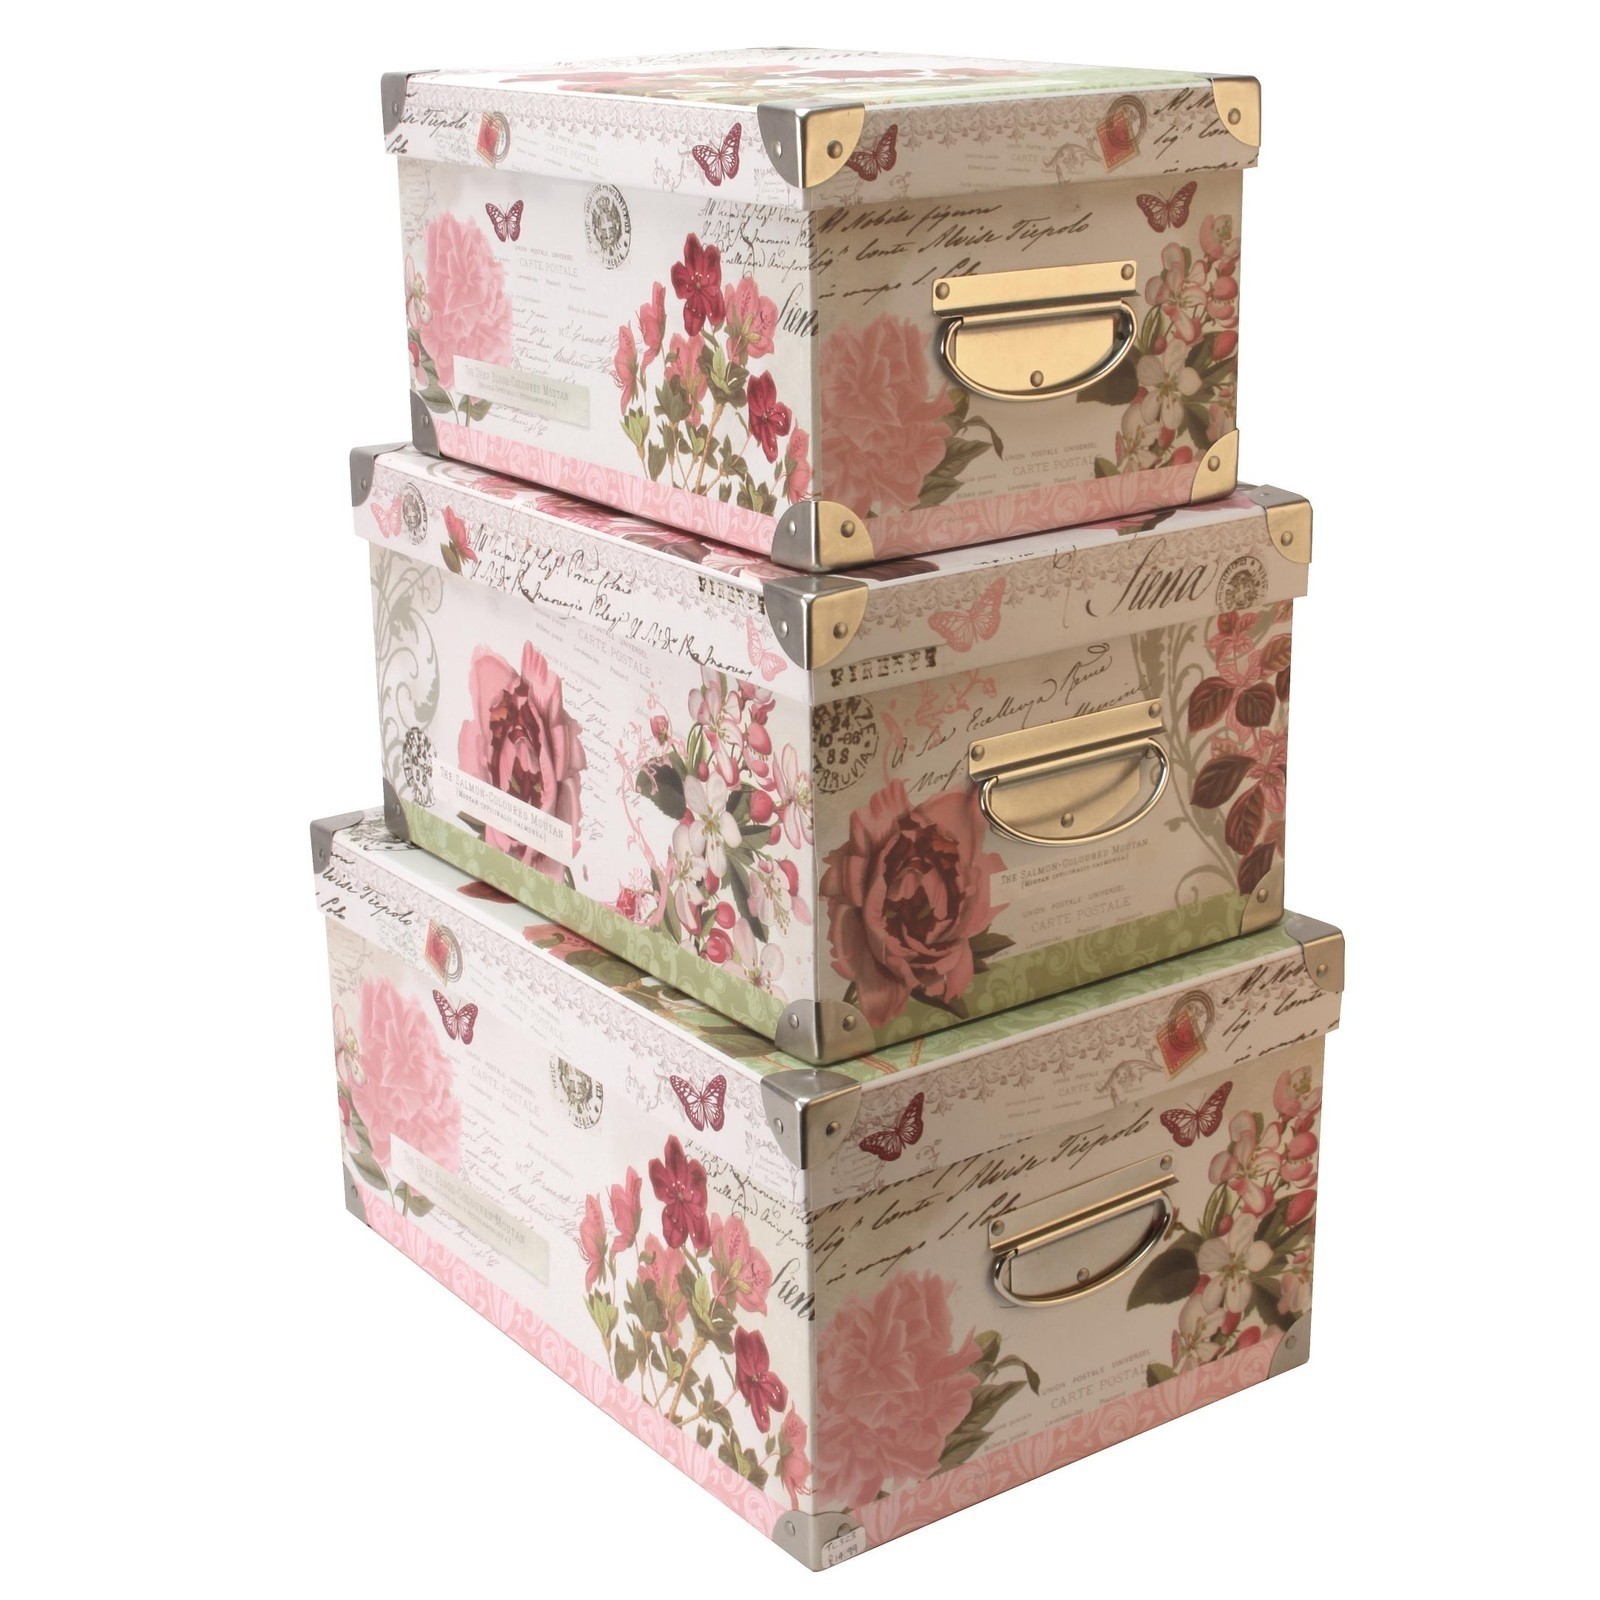 Pretty storage boxes yueyue small 4 pack fabric stroage 1